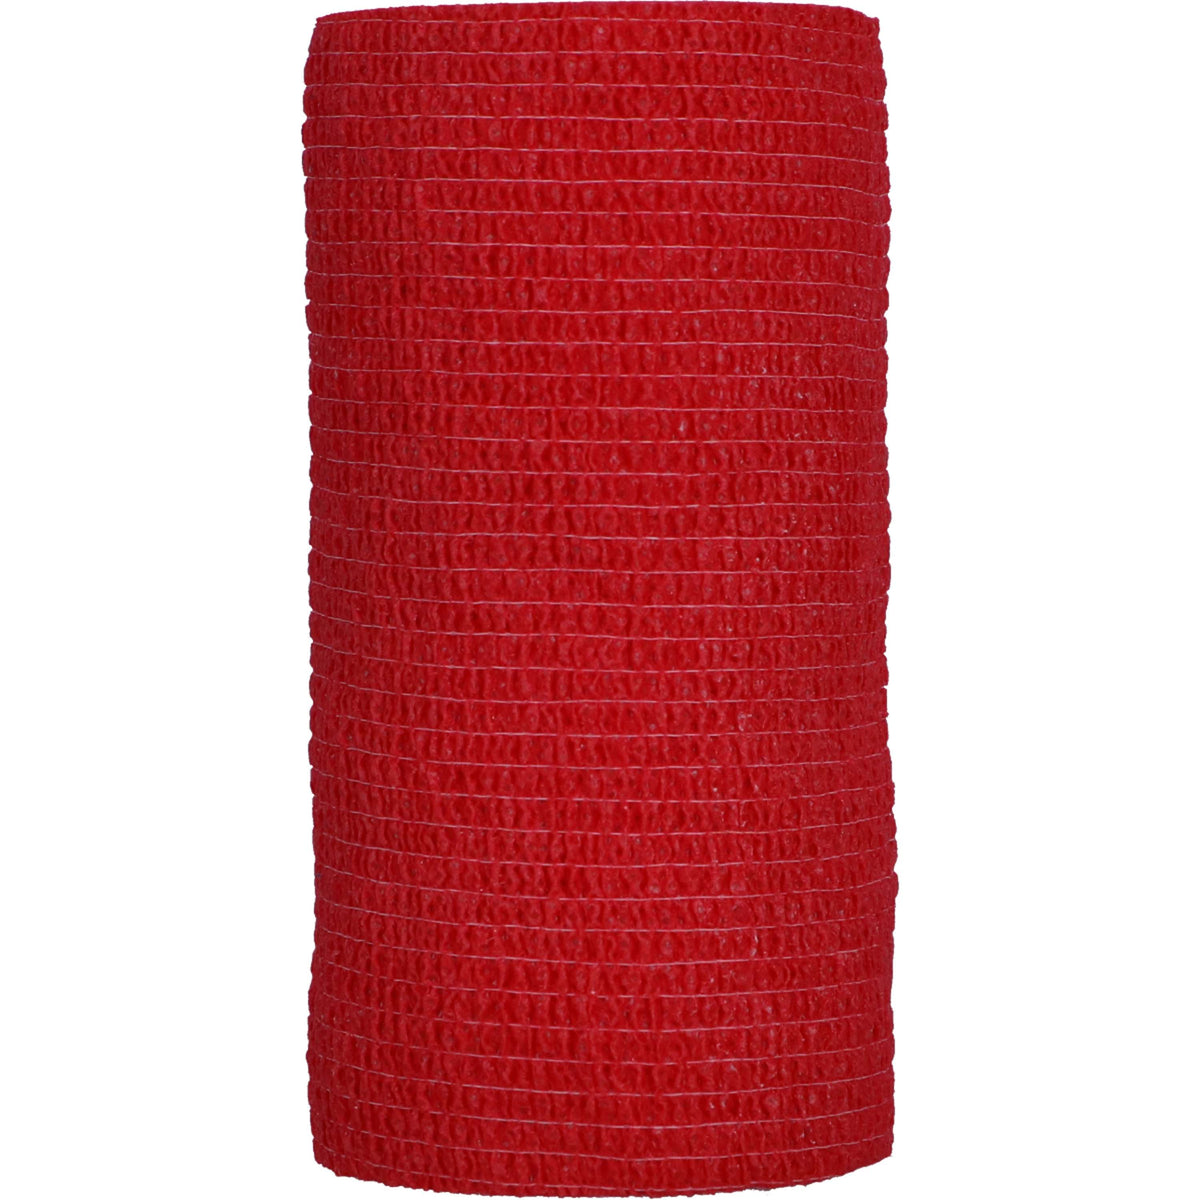 Kerbl EquiLastic Selbsthaftende Bandage 4,5m Rot